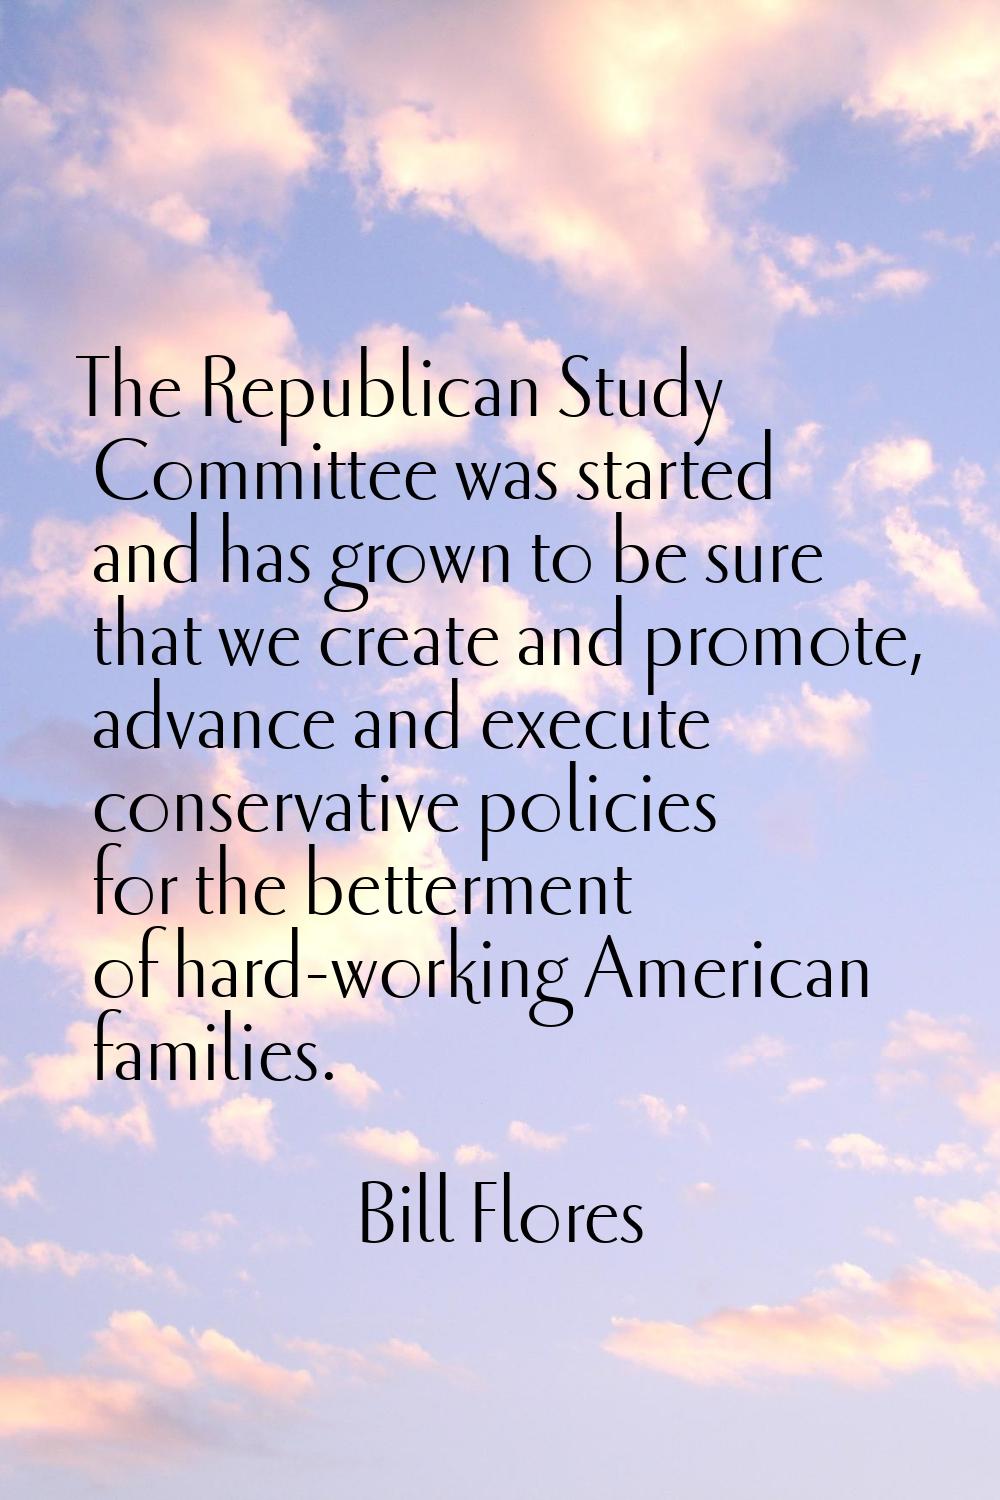 The Republican Study Committee was started and has grown to be sure that we create and promote, adv